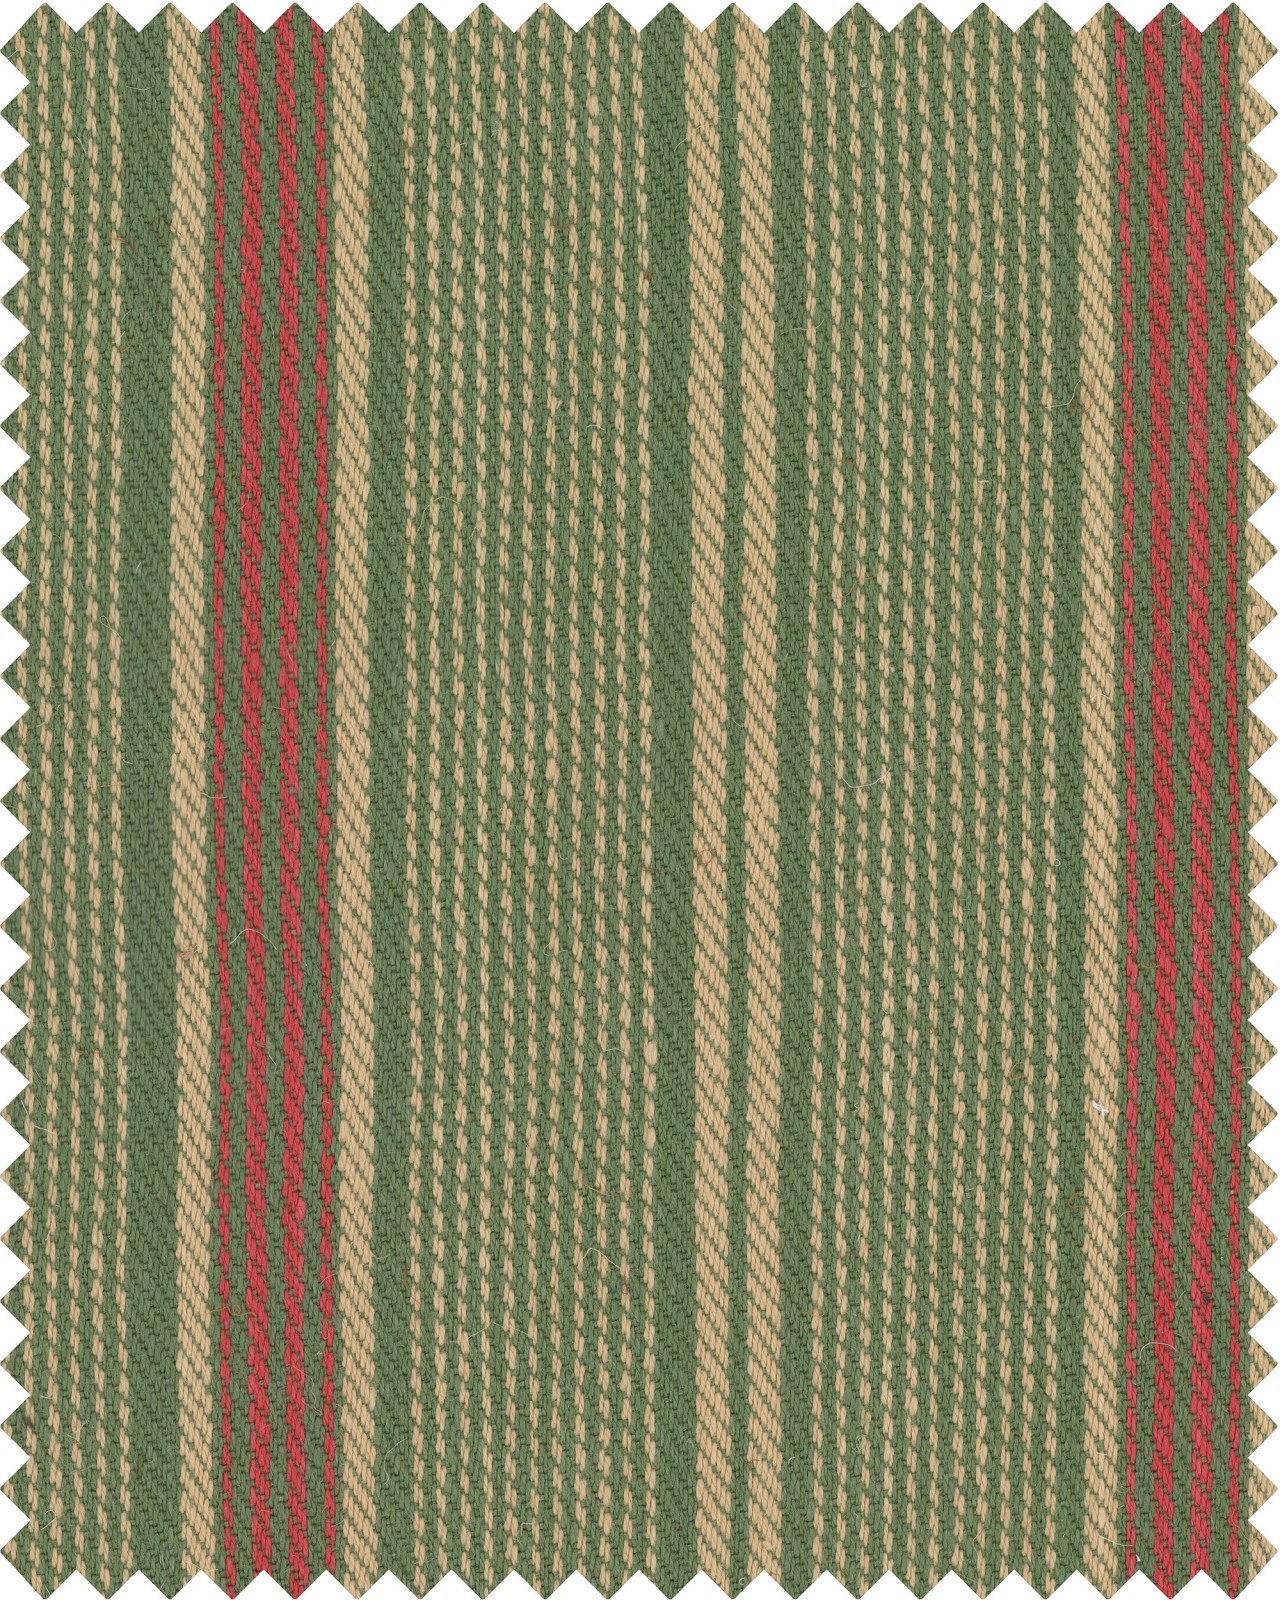 TYROLEAN STRIPES Woven Fabric Sample